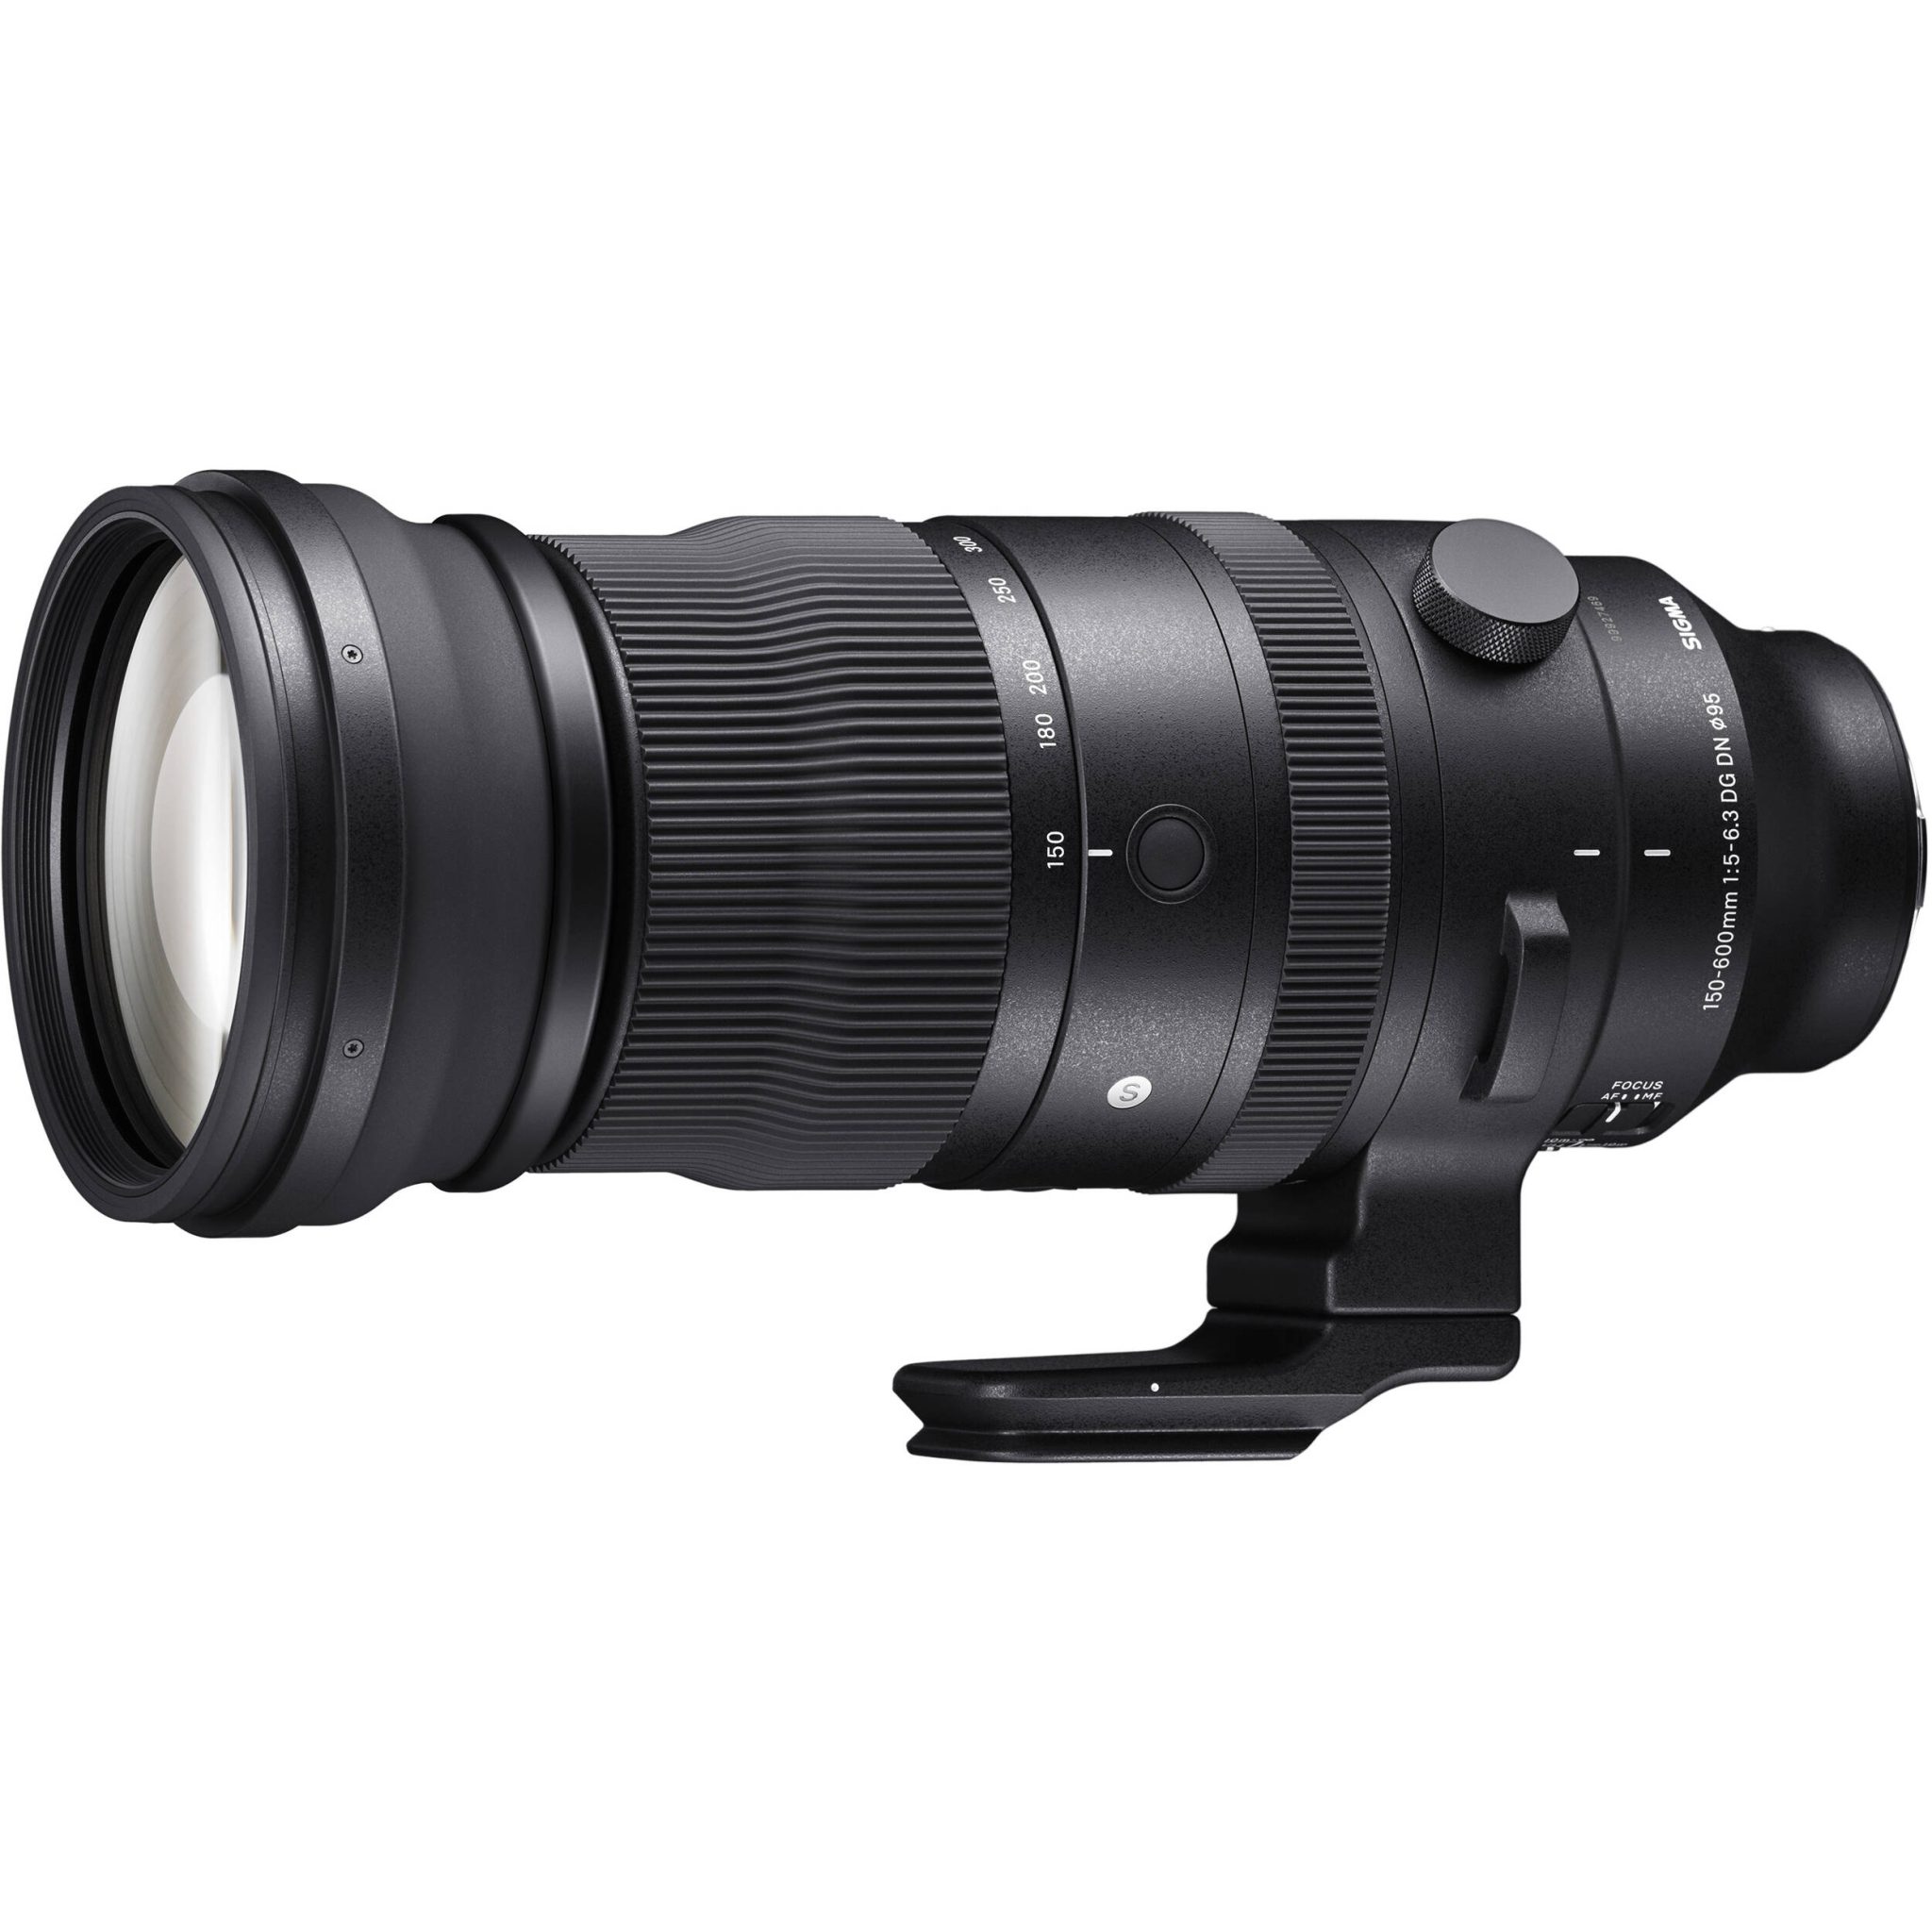 150-600mm f/5-6.3 DG DN OS Sports Lens from Sigma offers the features and image quality that professionals demand